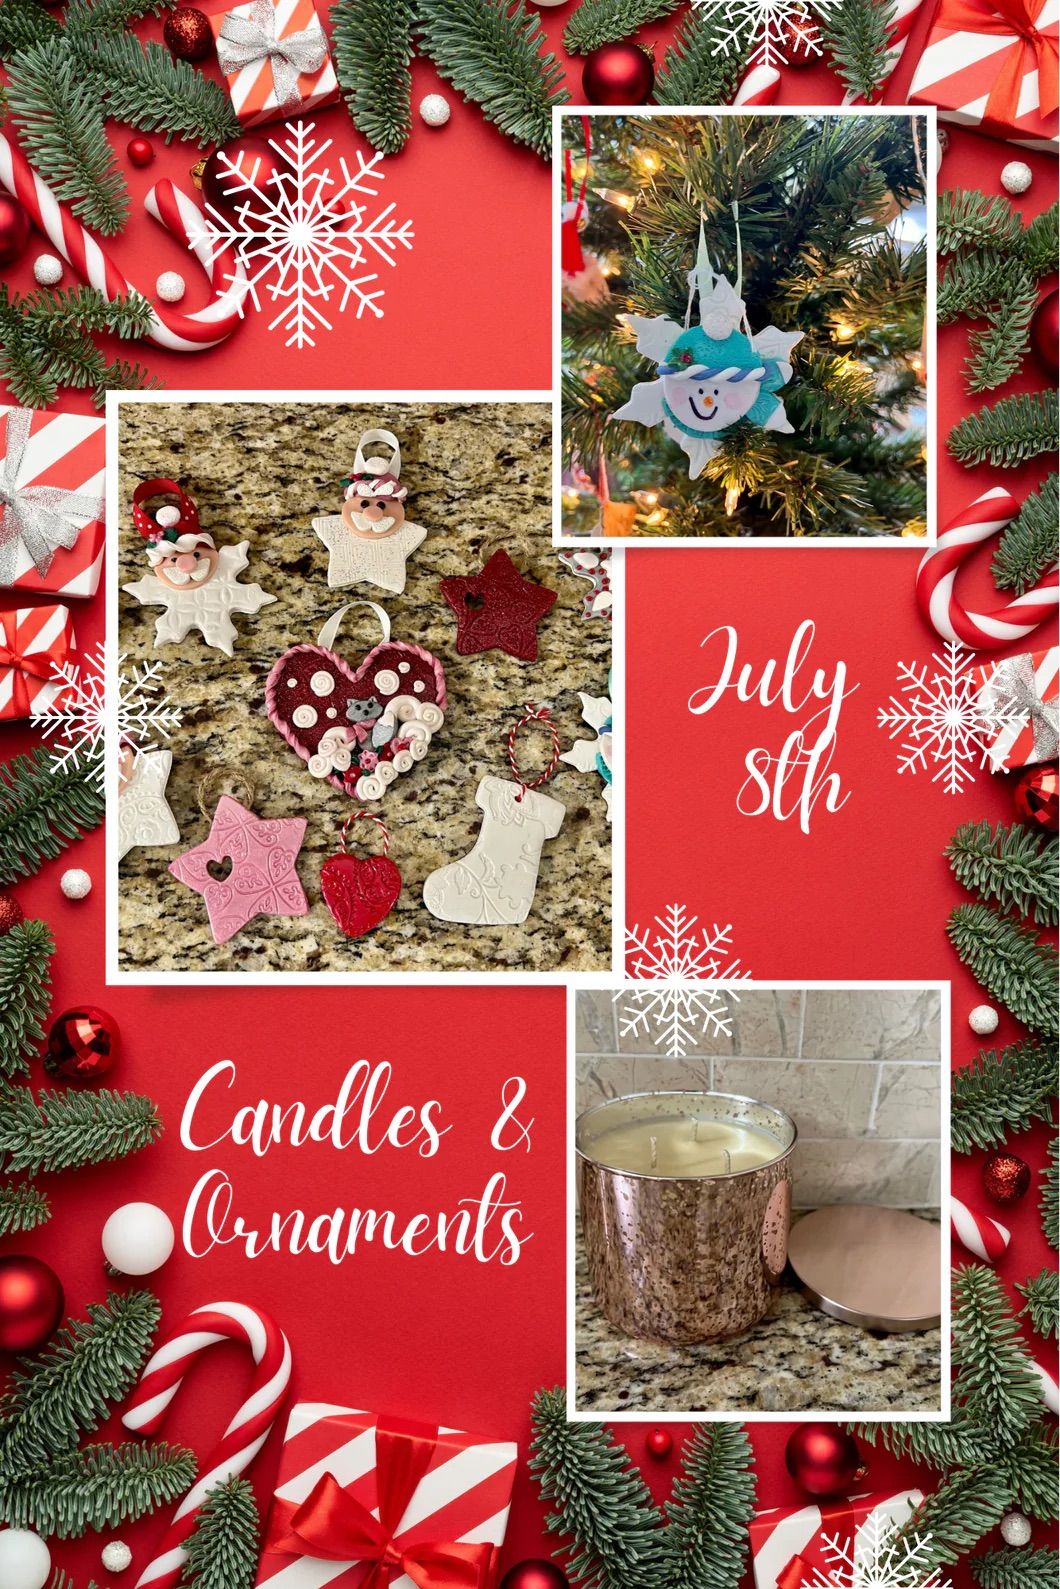 Clay Ornaments & Candles 